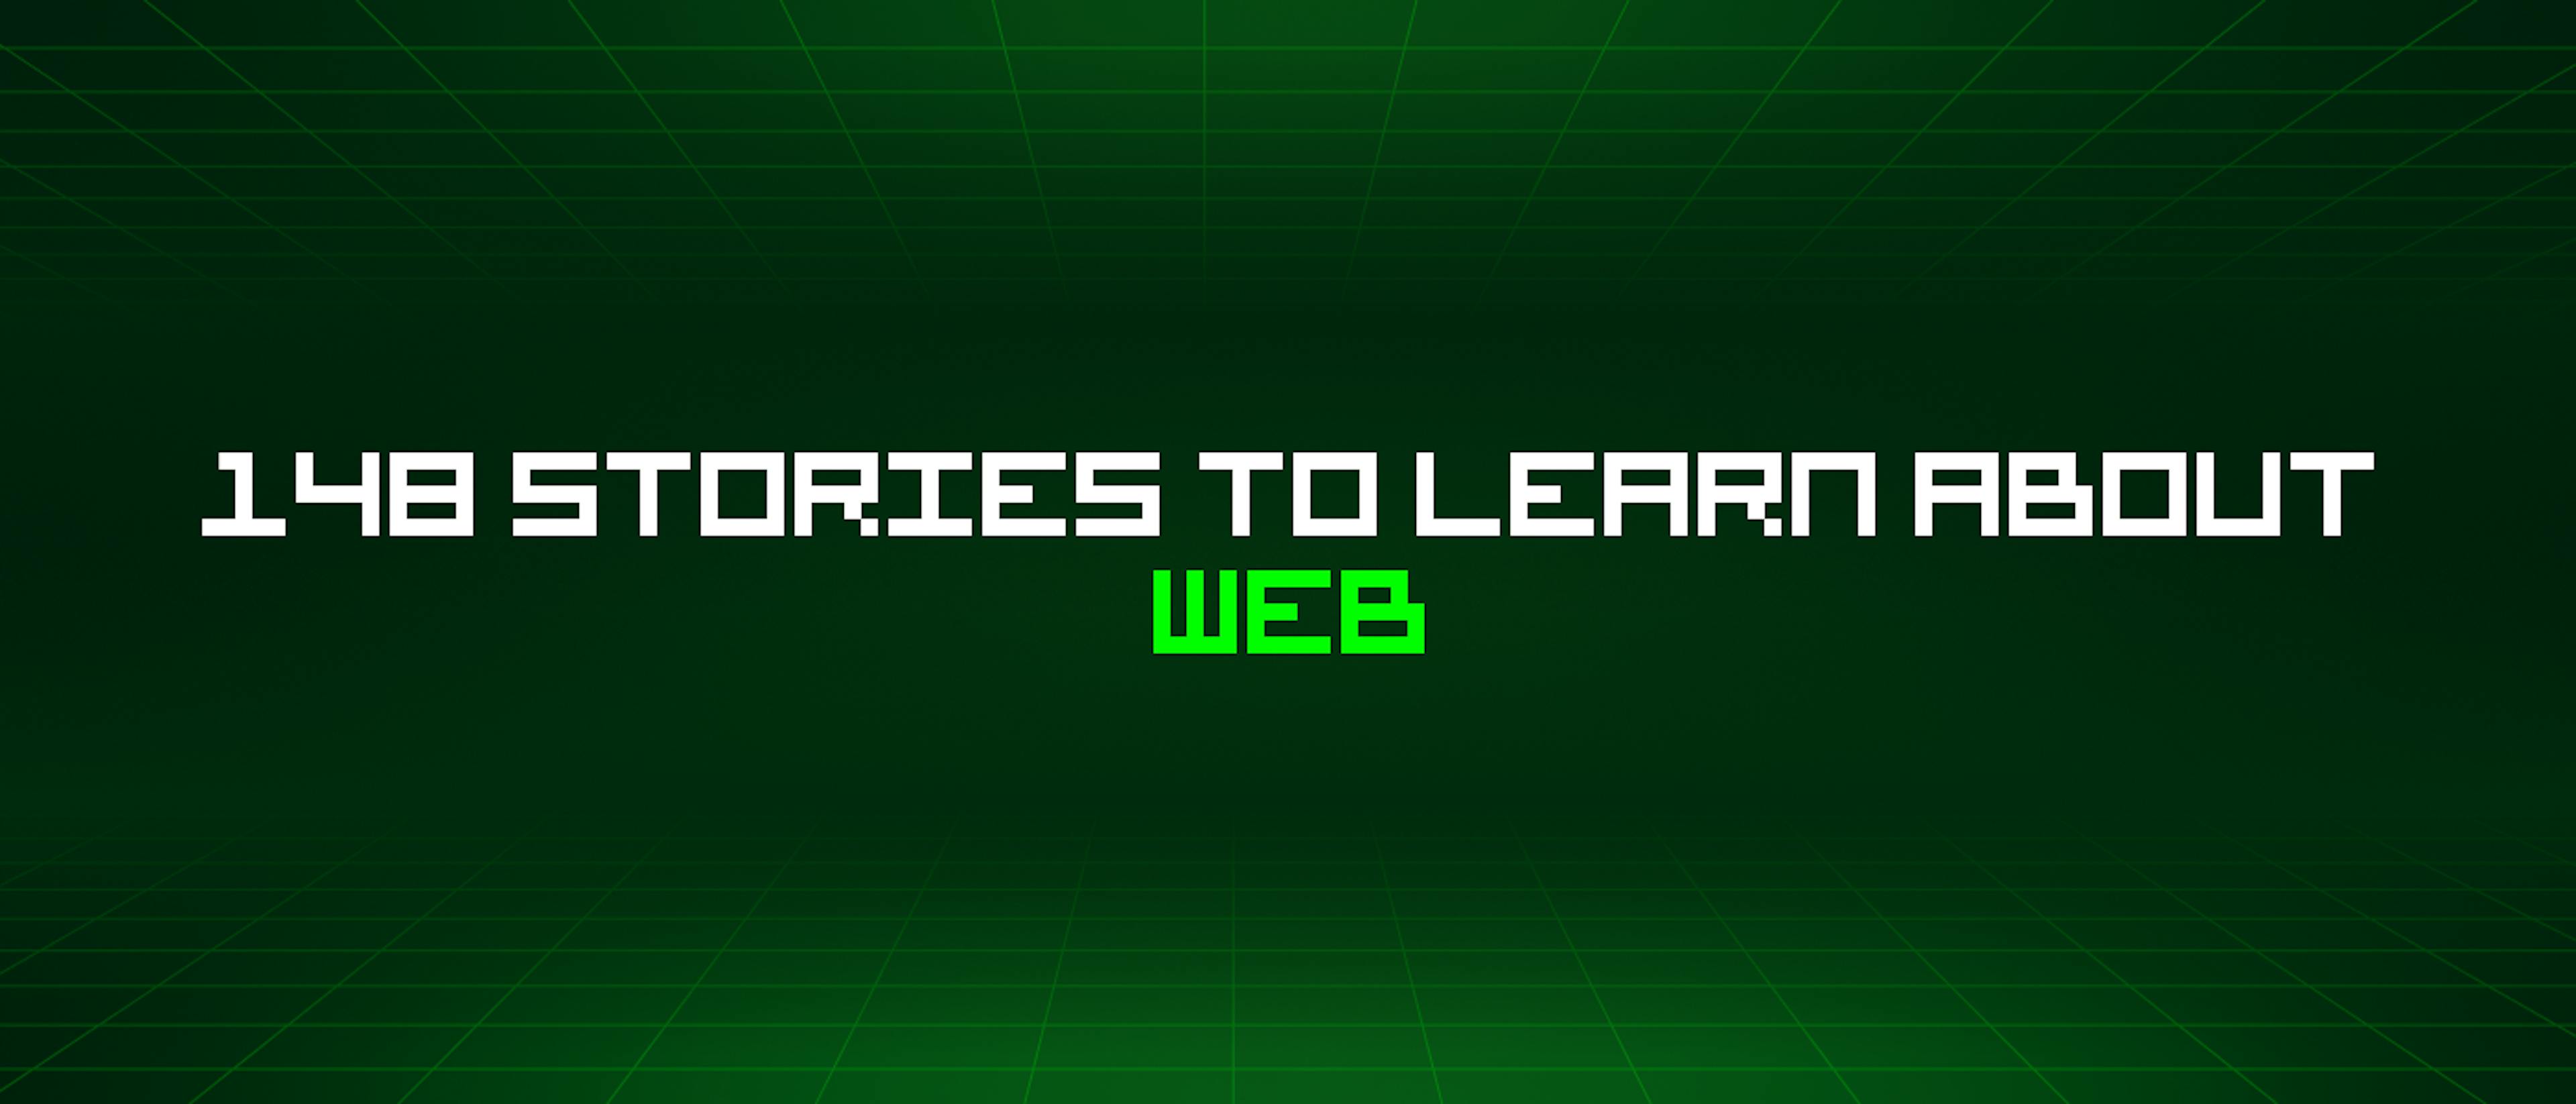 featured image - 148 Stories To Learn About Web